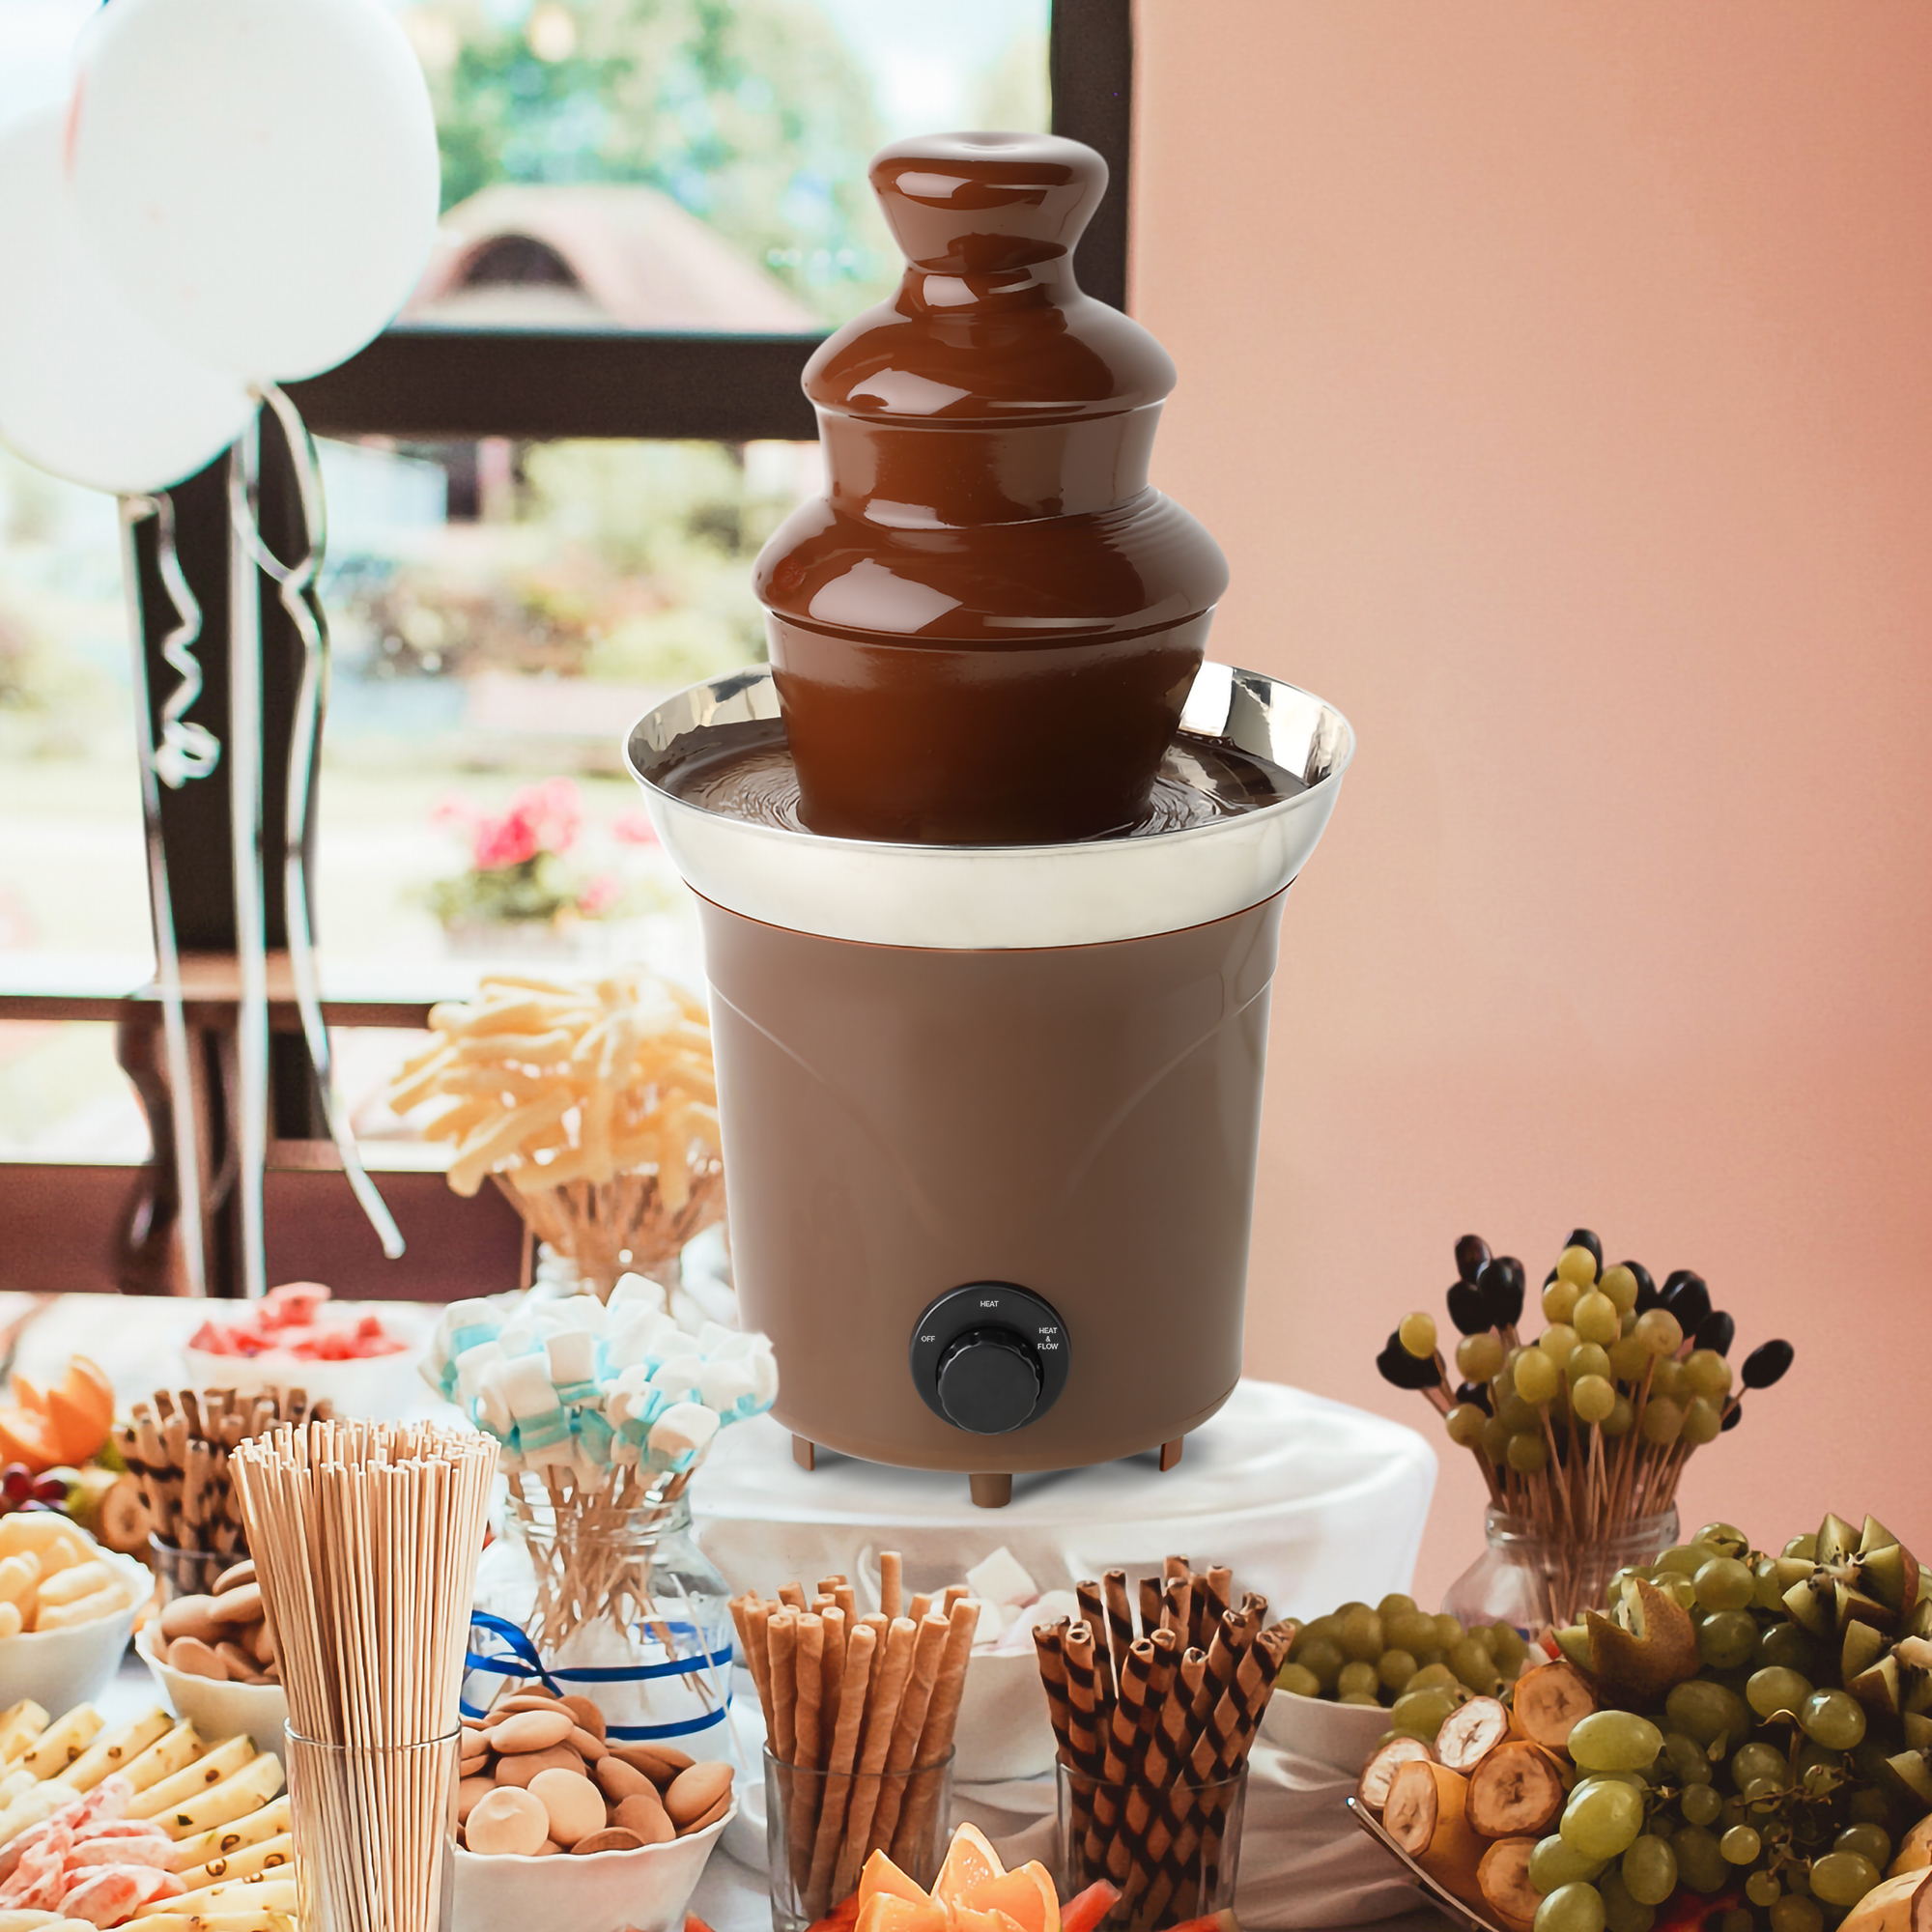 Way to Celebrate 3-Tier Classic Model Compact Chocolate Fondue Fountain - image 1 of 7